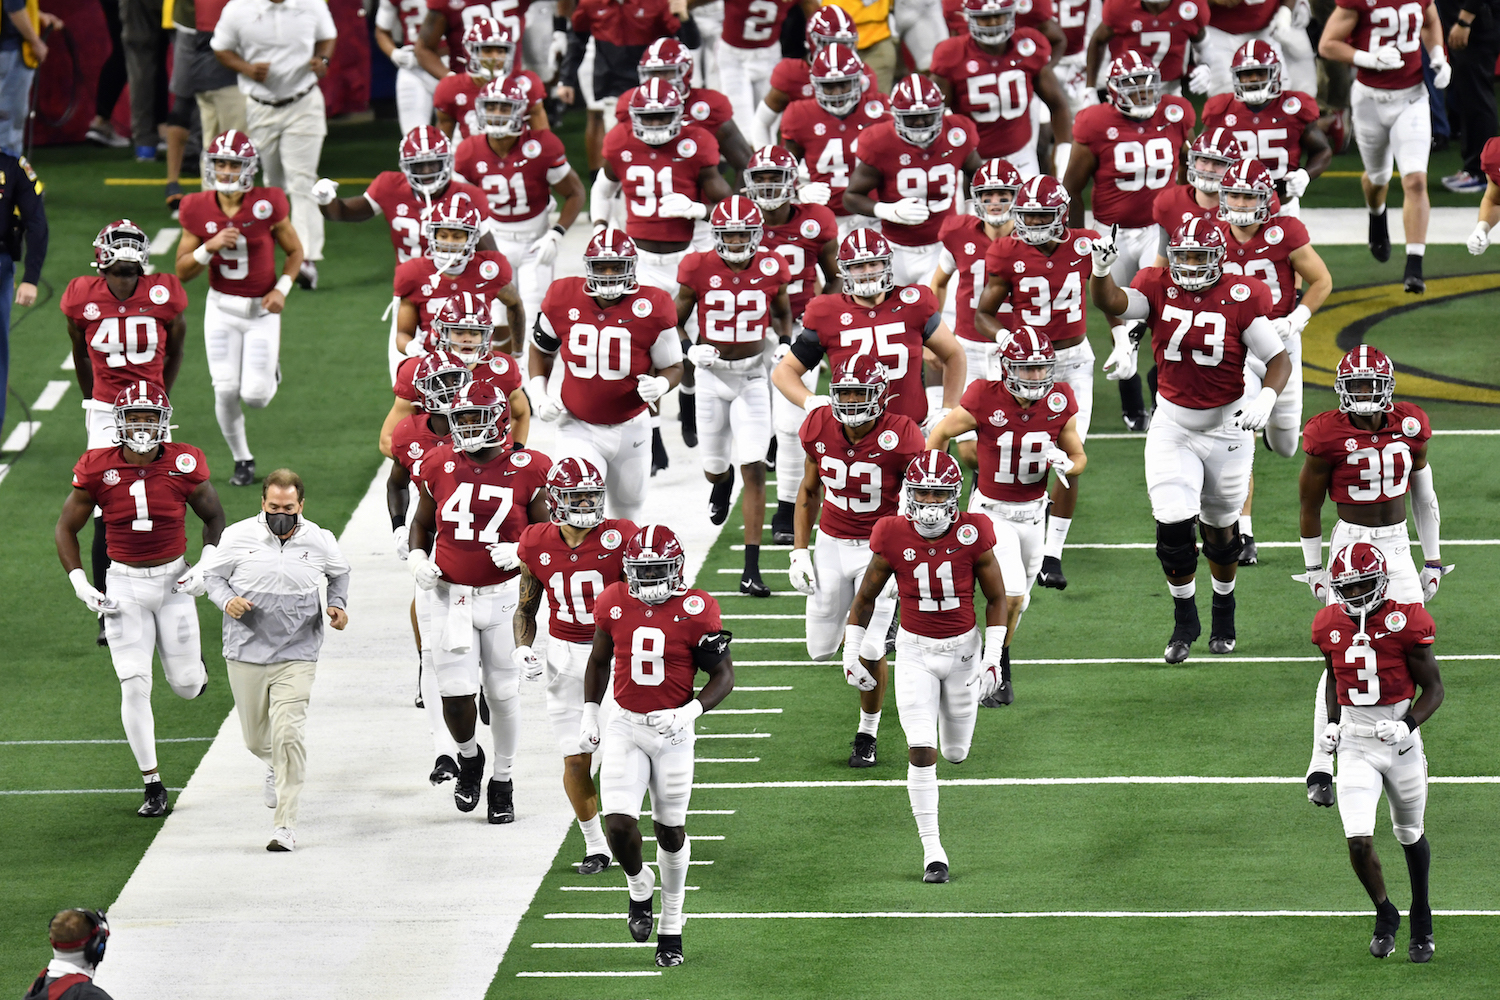 Why Is the University of Alabama's Football Team Called the Crimson Tide?